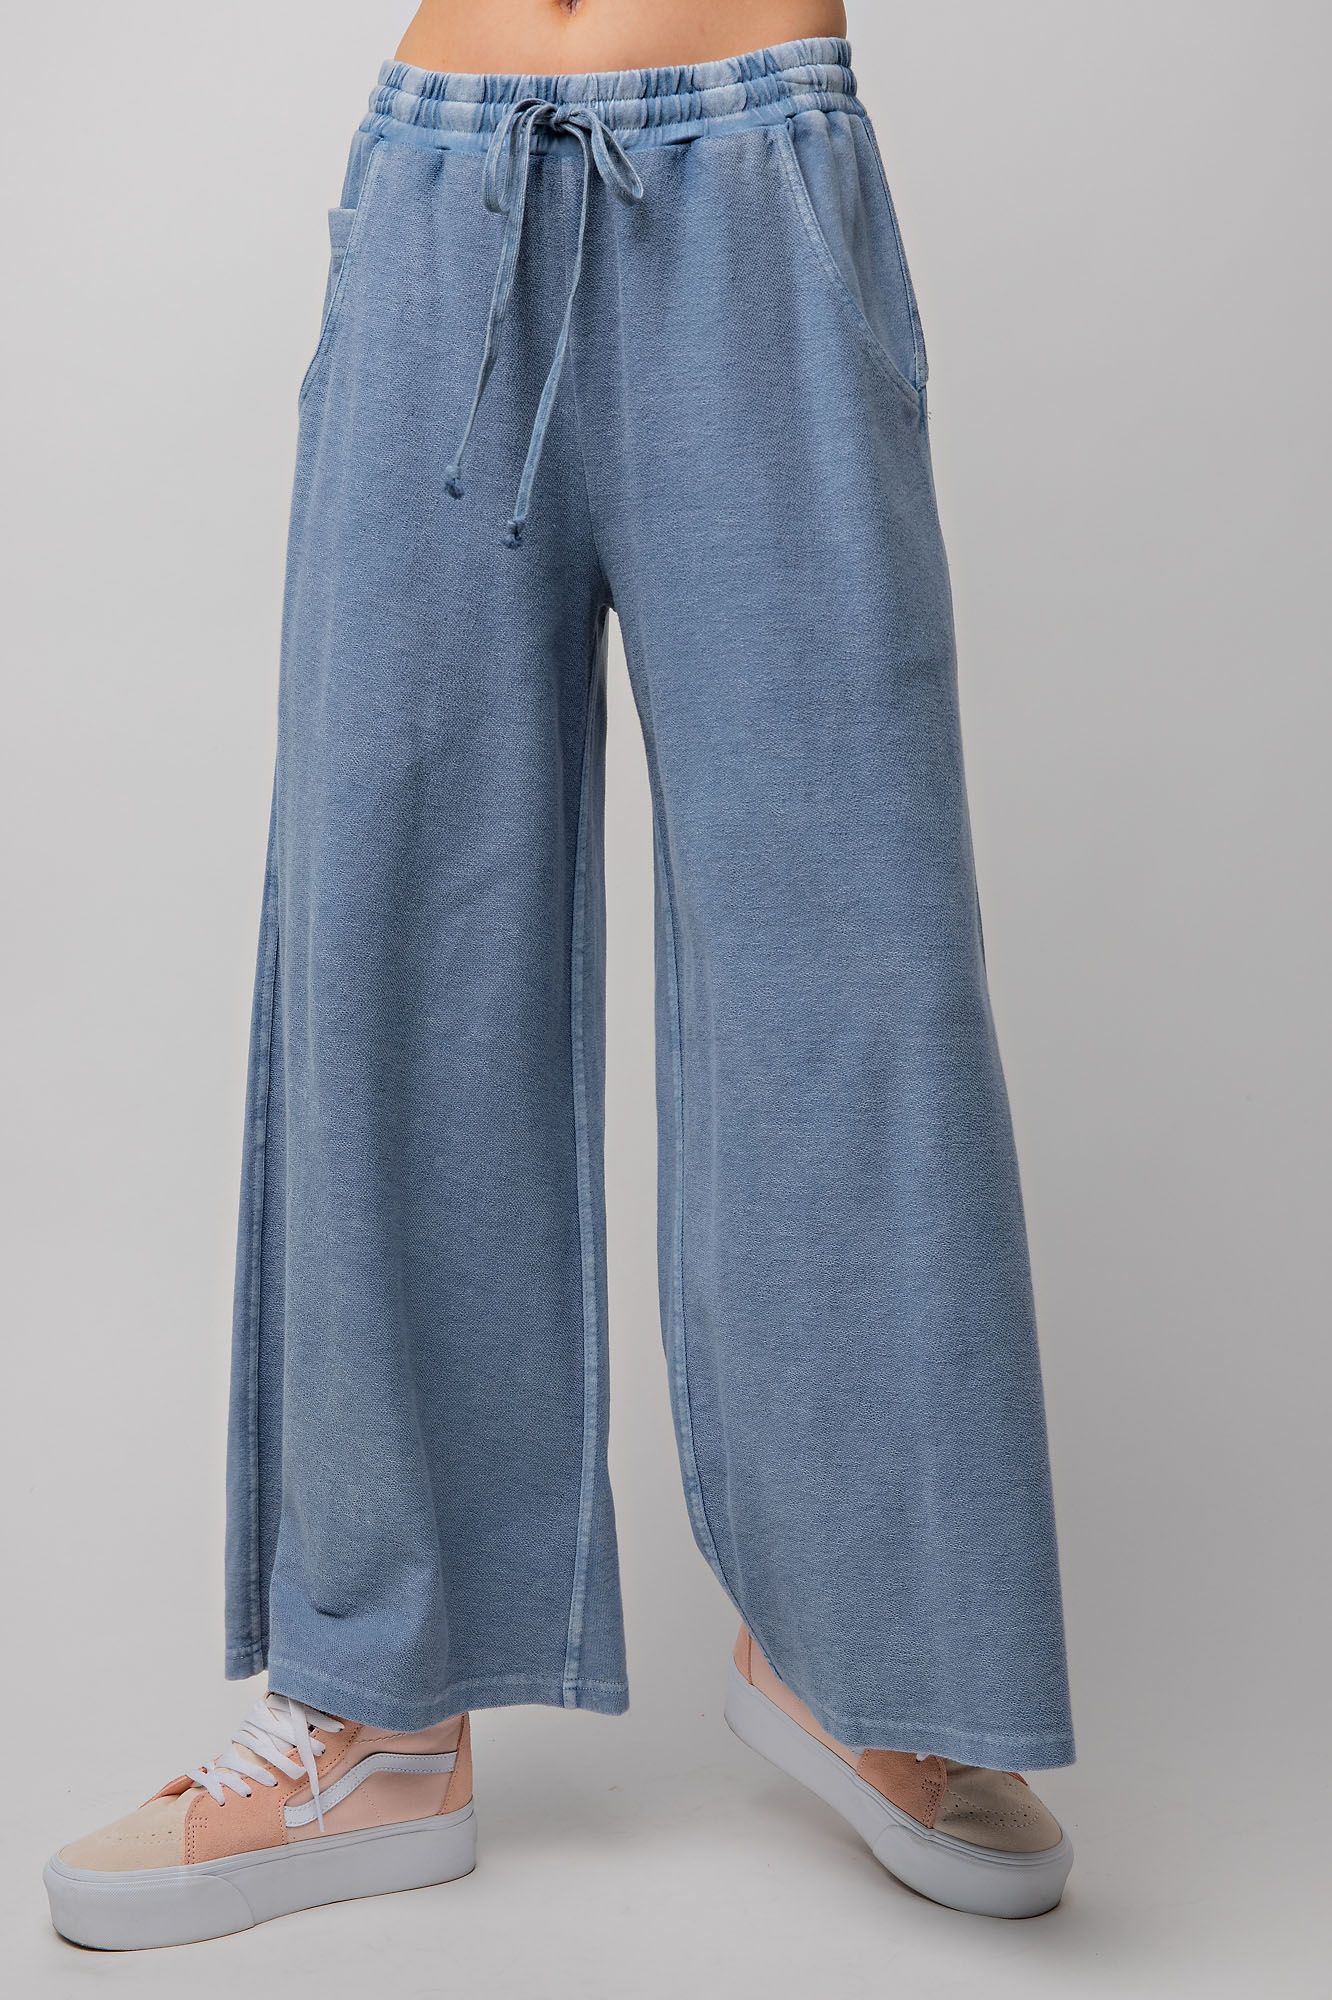 Inside Out Mineral Washed Terry Knit Wide Leg Pants in Denim